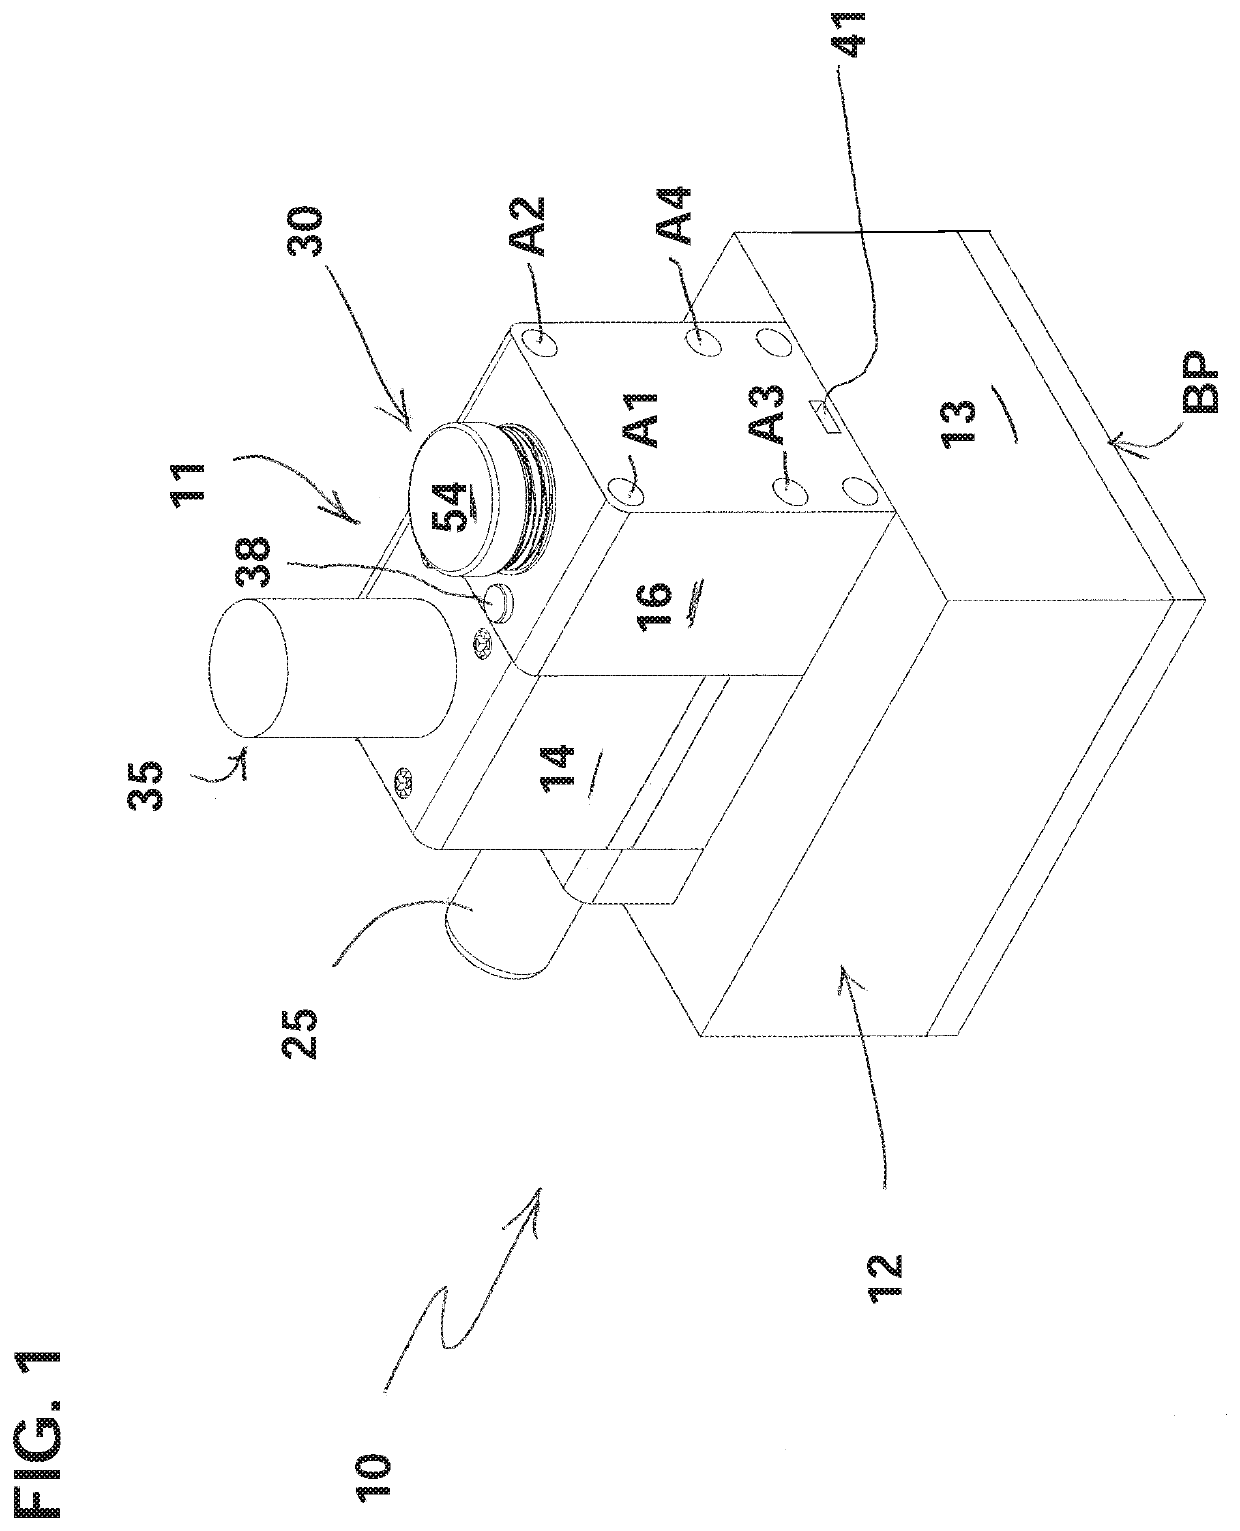 Vaporizer apparatus having both a vacuum pump and a heating element, and method of using same